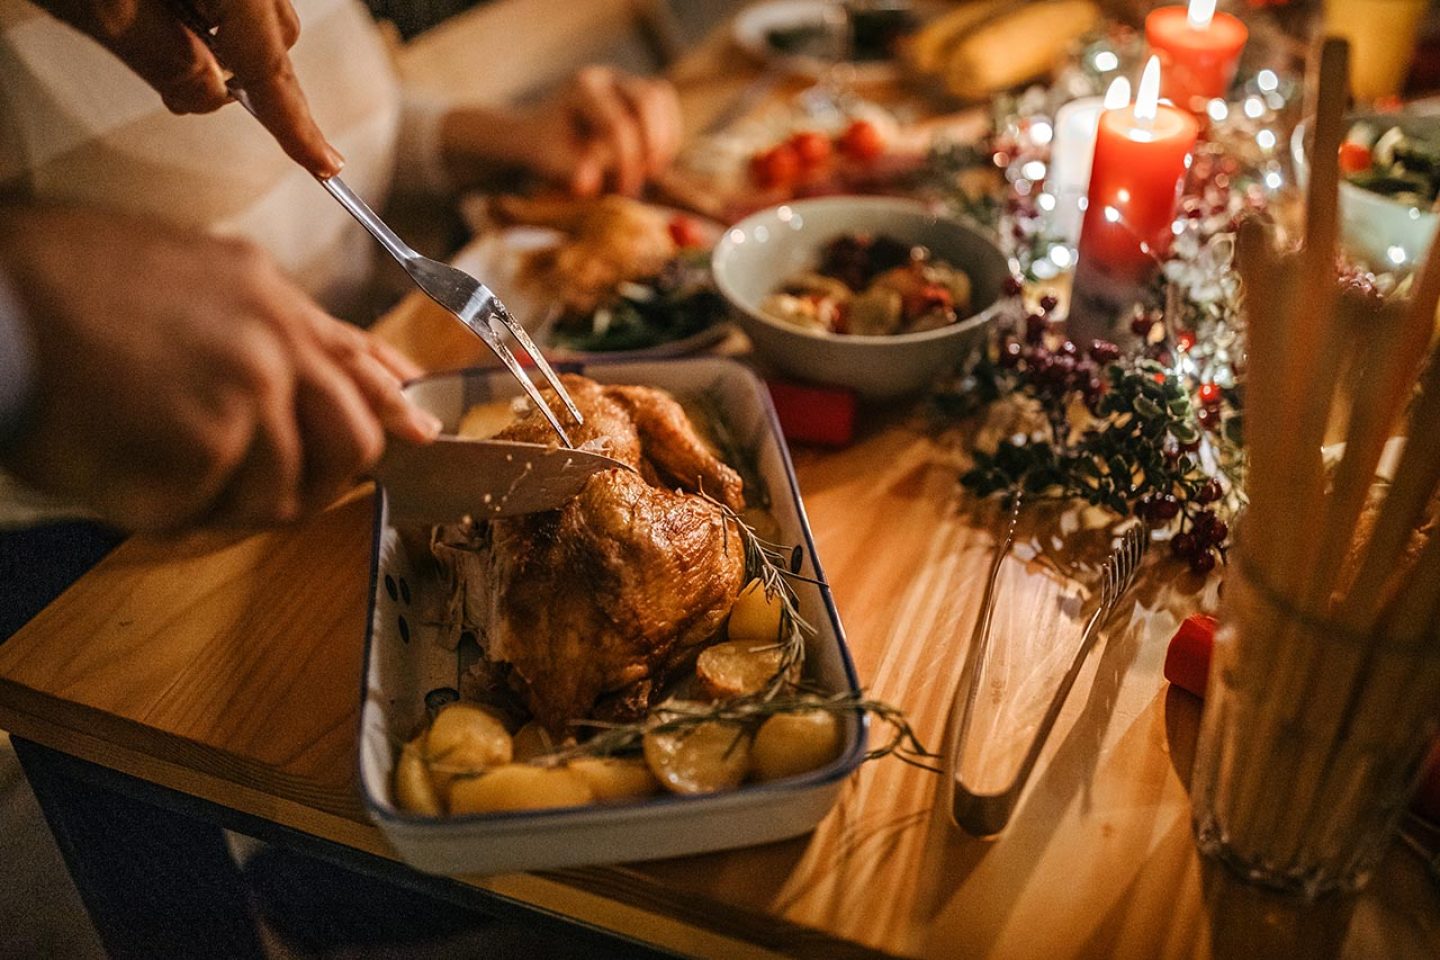 Man serving roasted chicken to his wife on the occasion of Christmas dinner celebration